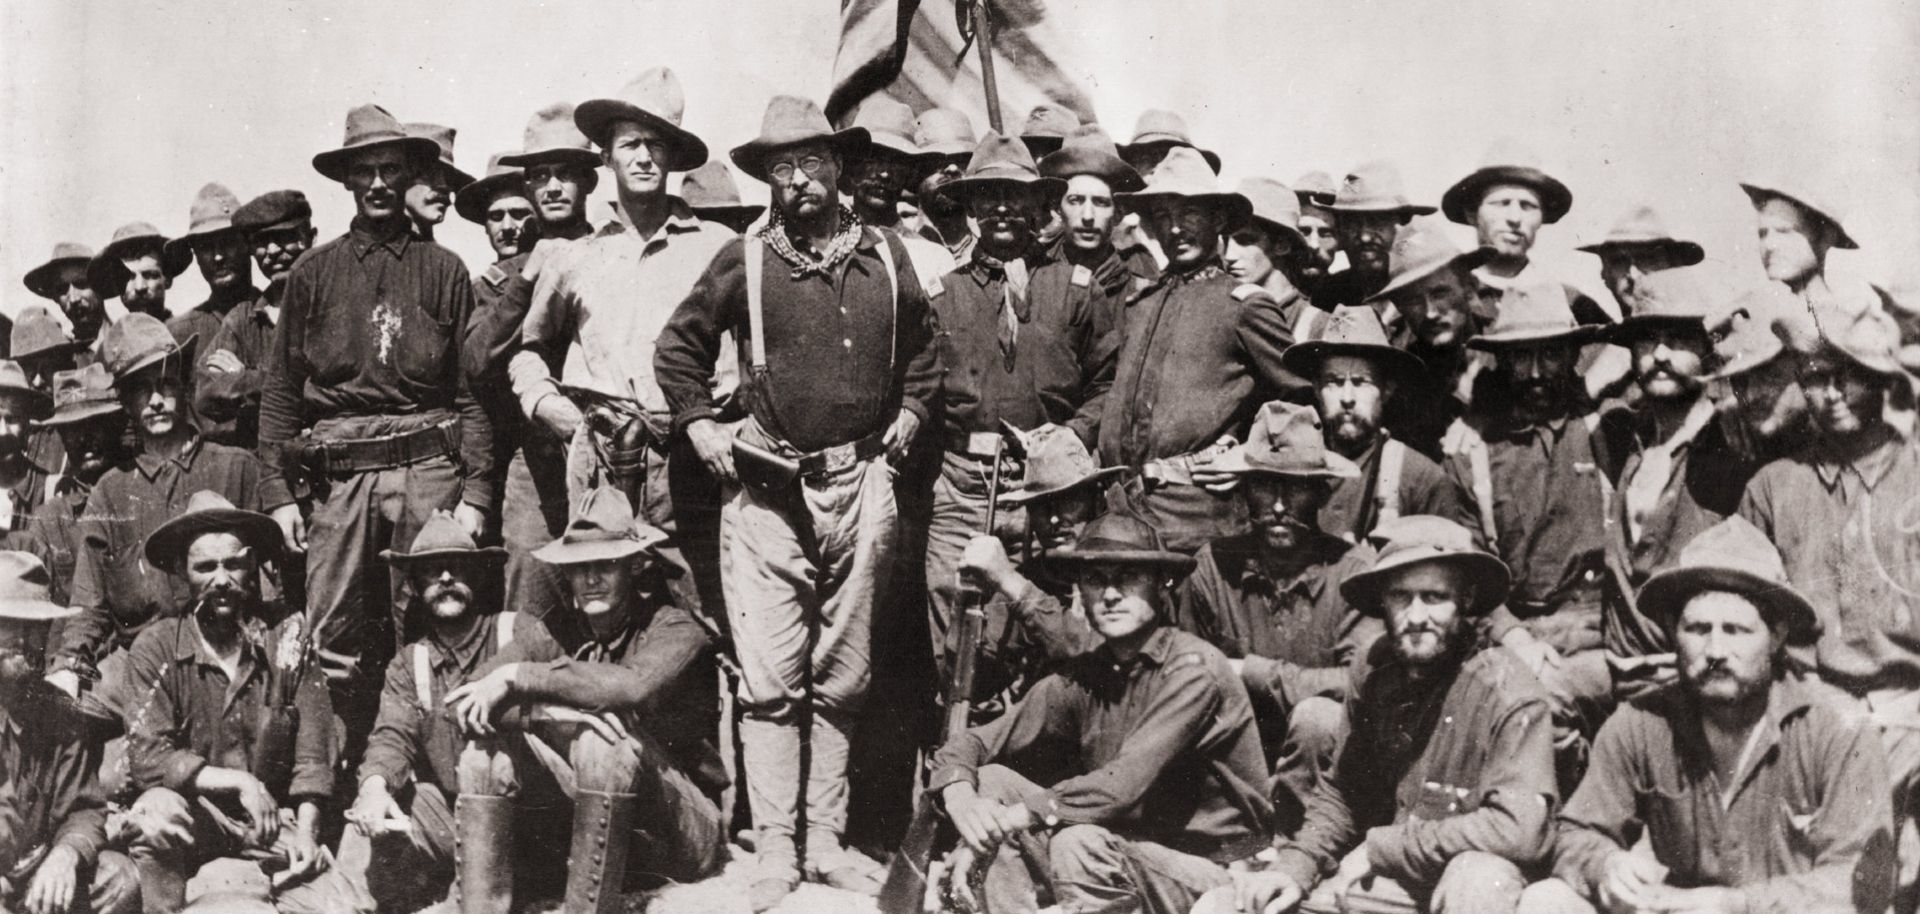 Theodore Roosevelt stands with the First Cavalry Volunteers on San Juan Hill during the Spanish-American War. 